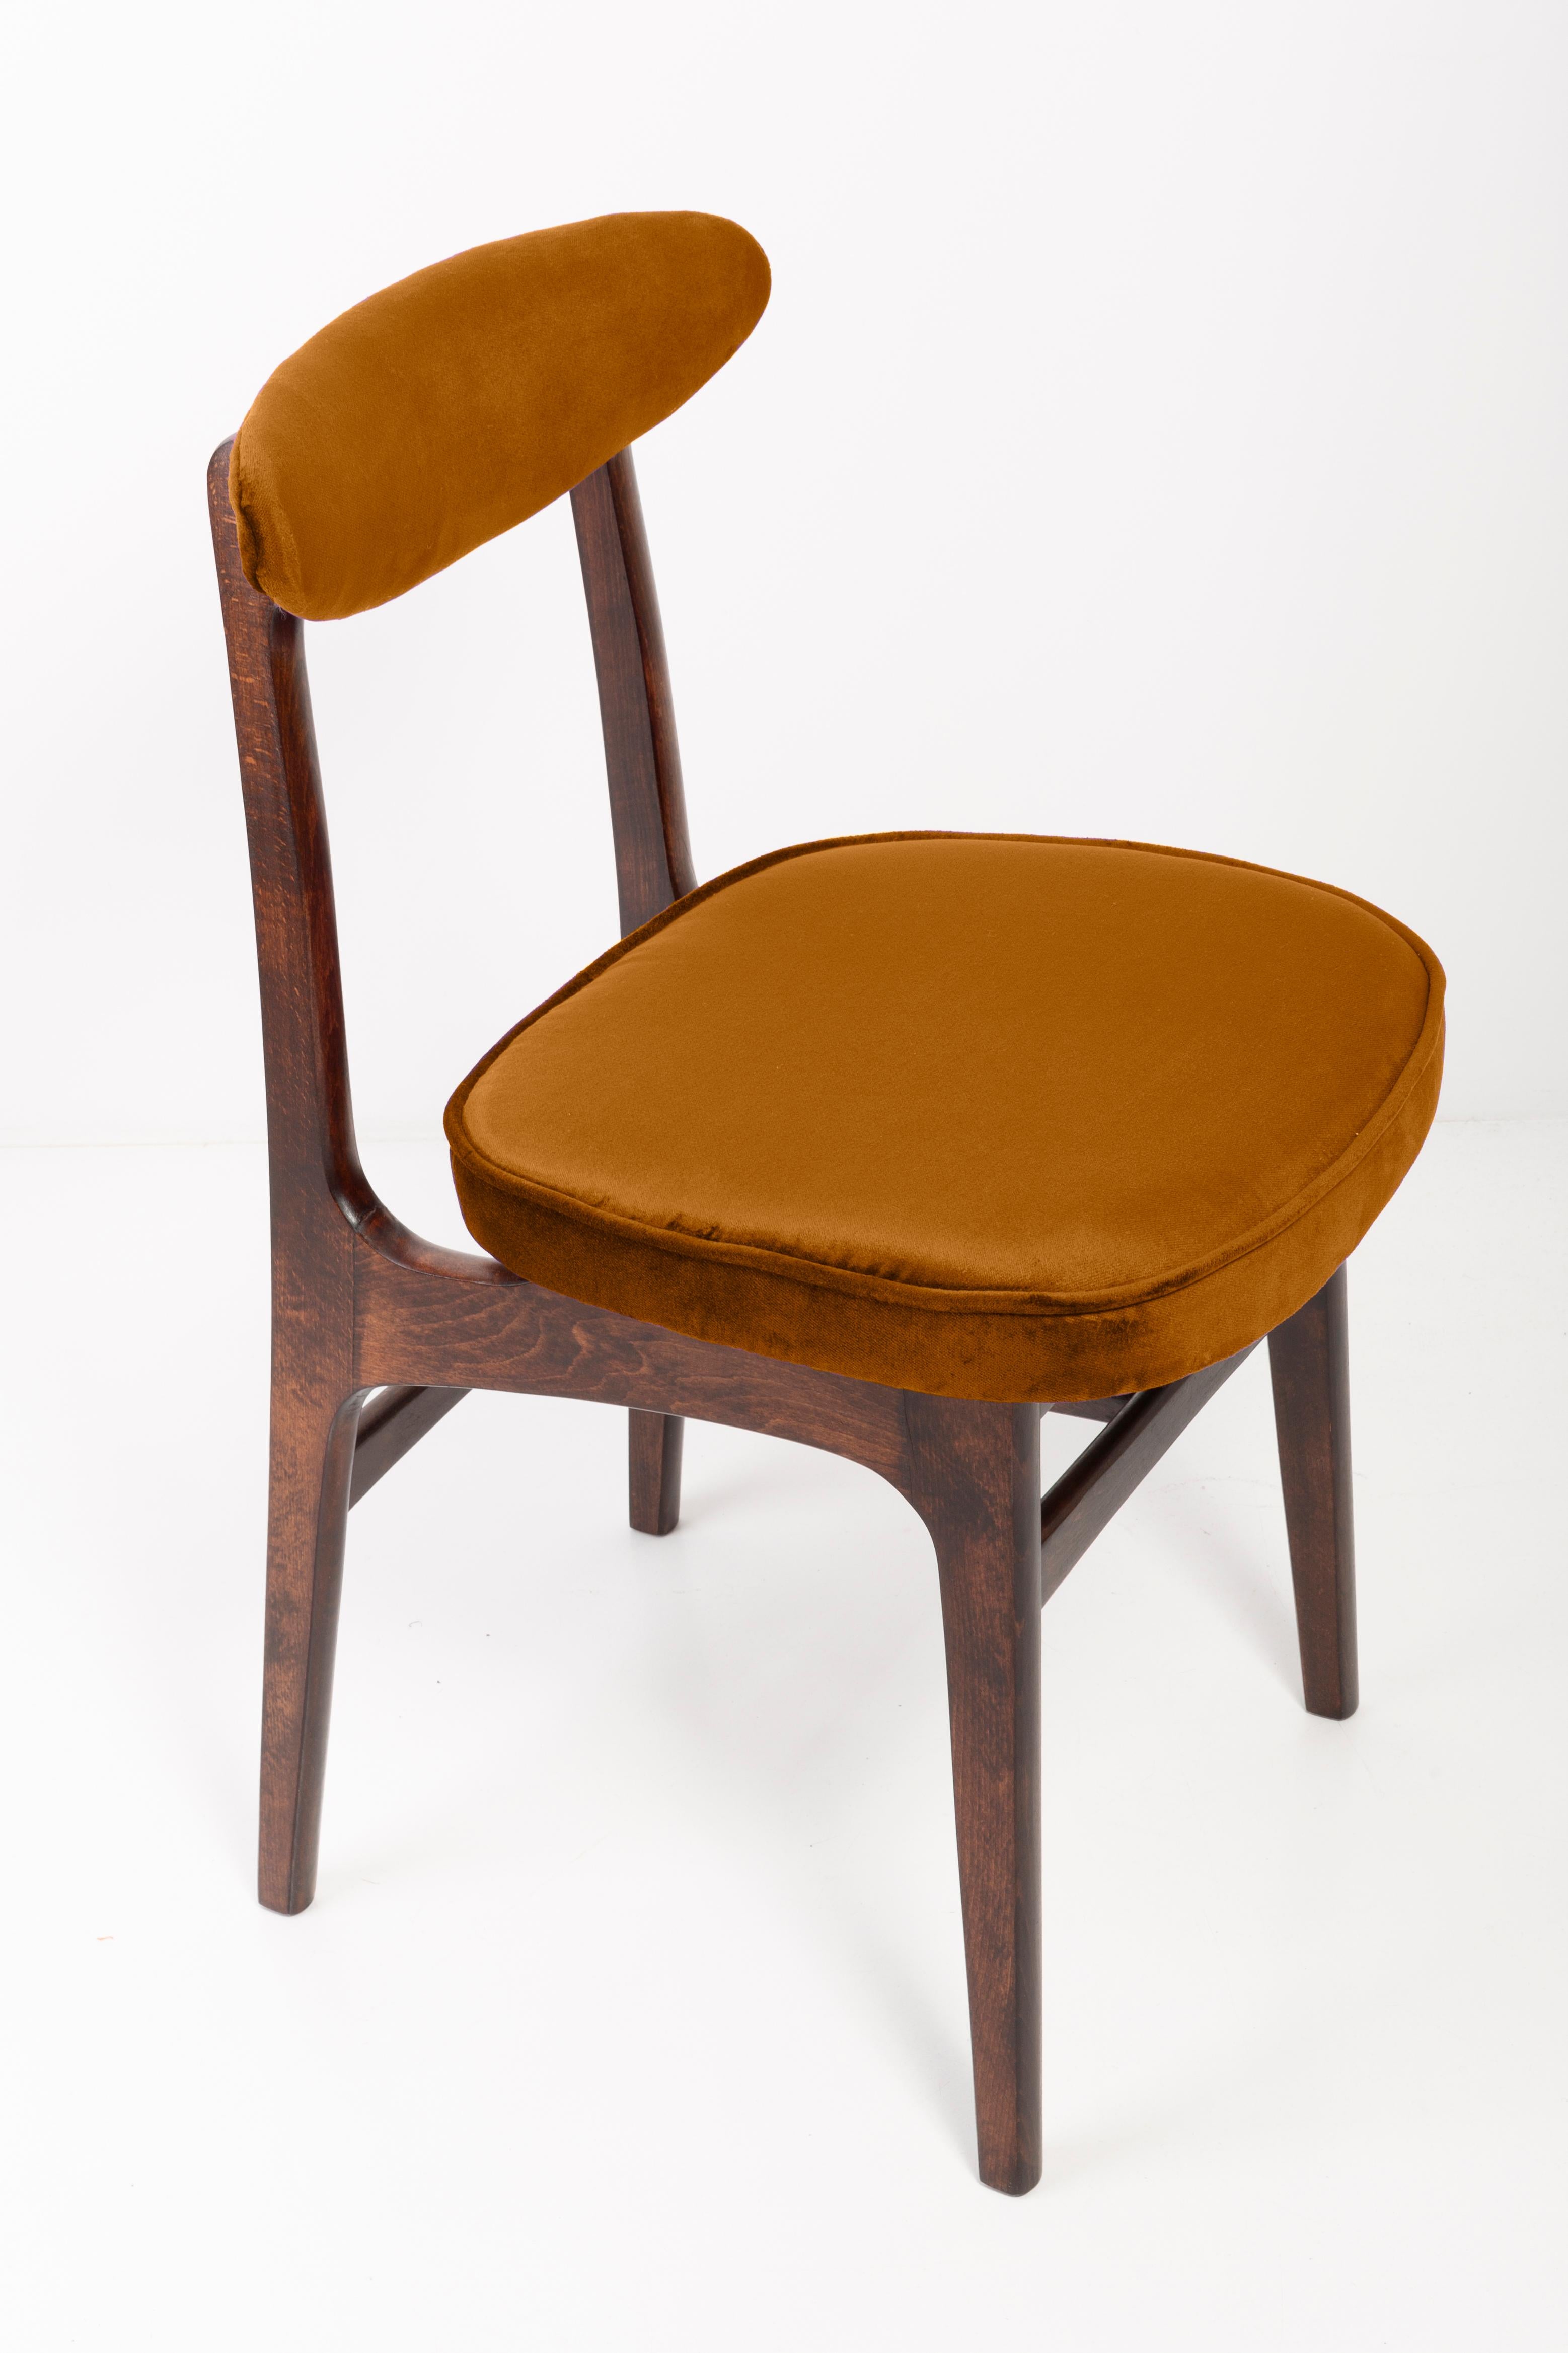 Light form nice vintage chair designed by Prof. Rajmund Halas. It has been made of beechwood. Chair is after undergone a complete upholstery renovation, the woodwork has been refreshed. Seats and backs were dressed in a copper (color 960), durable